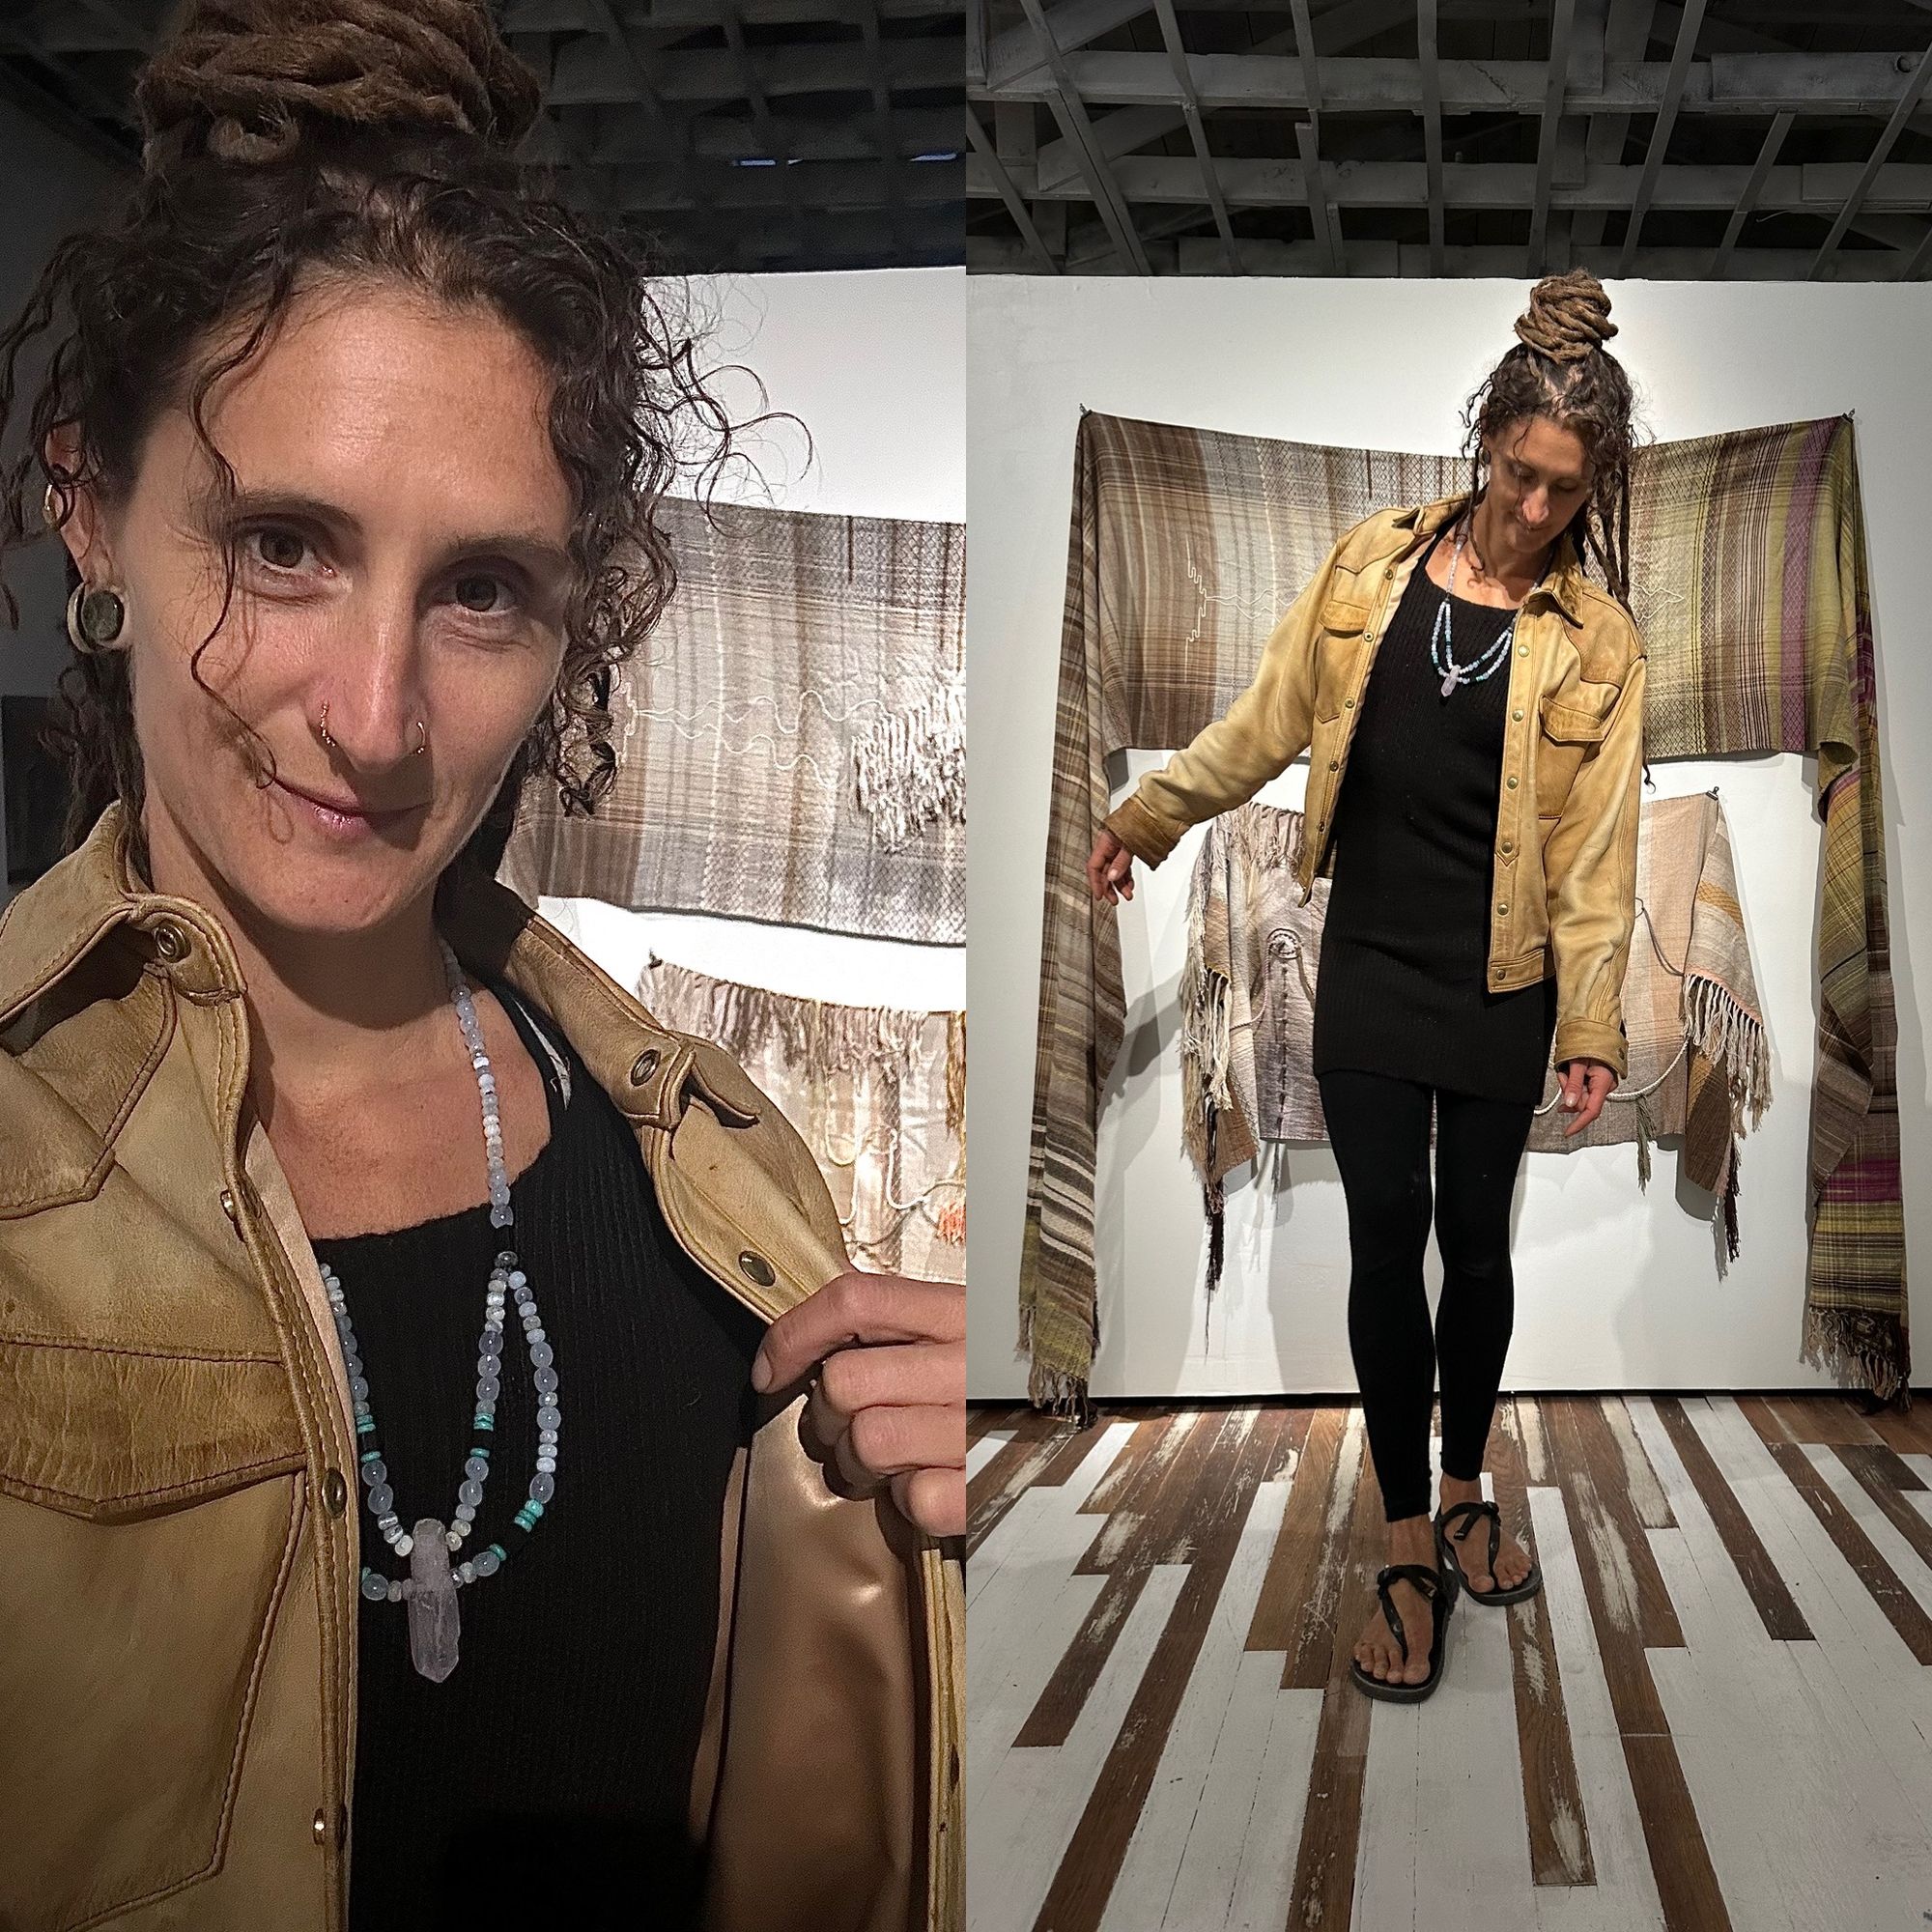 Two panels of photographs of the same women wearing a tan leather jacket and black knit outfit. The photo on the left os closer, the one on the right is farther away